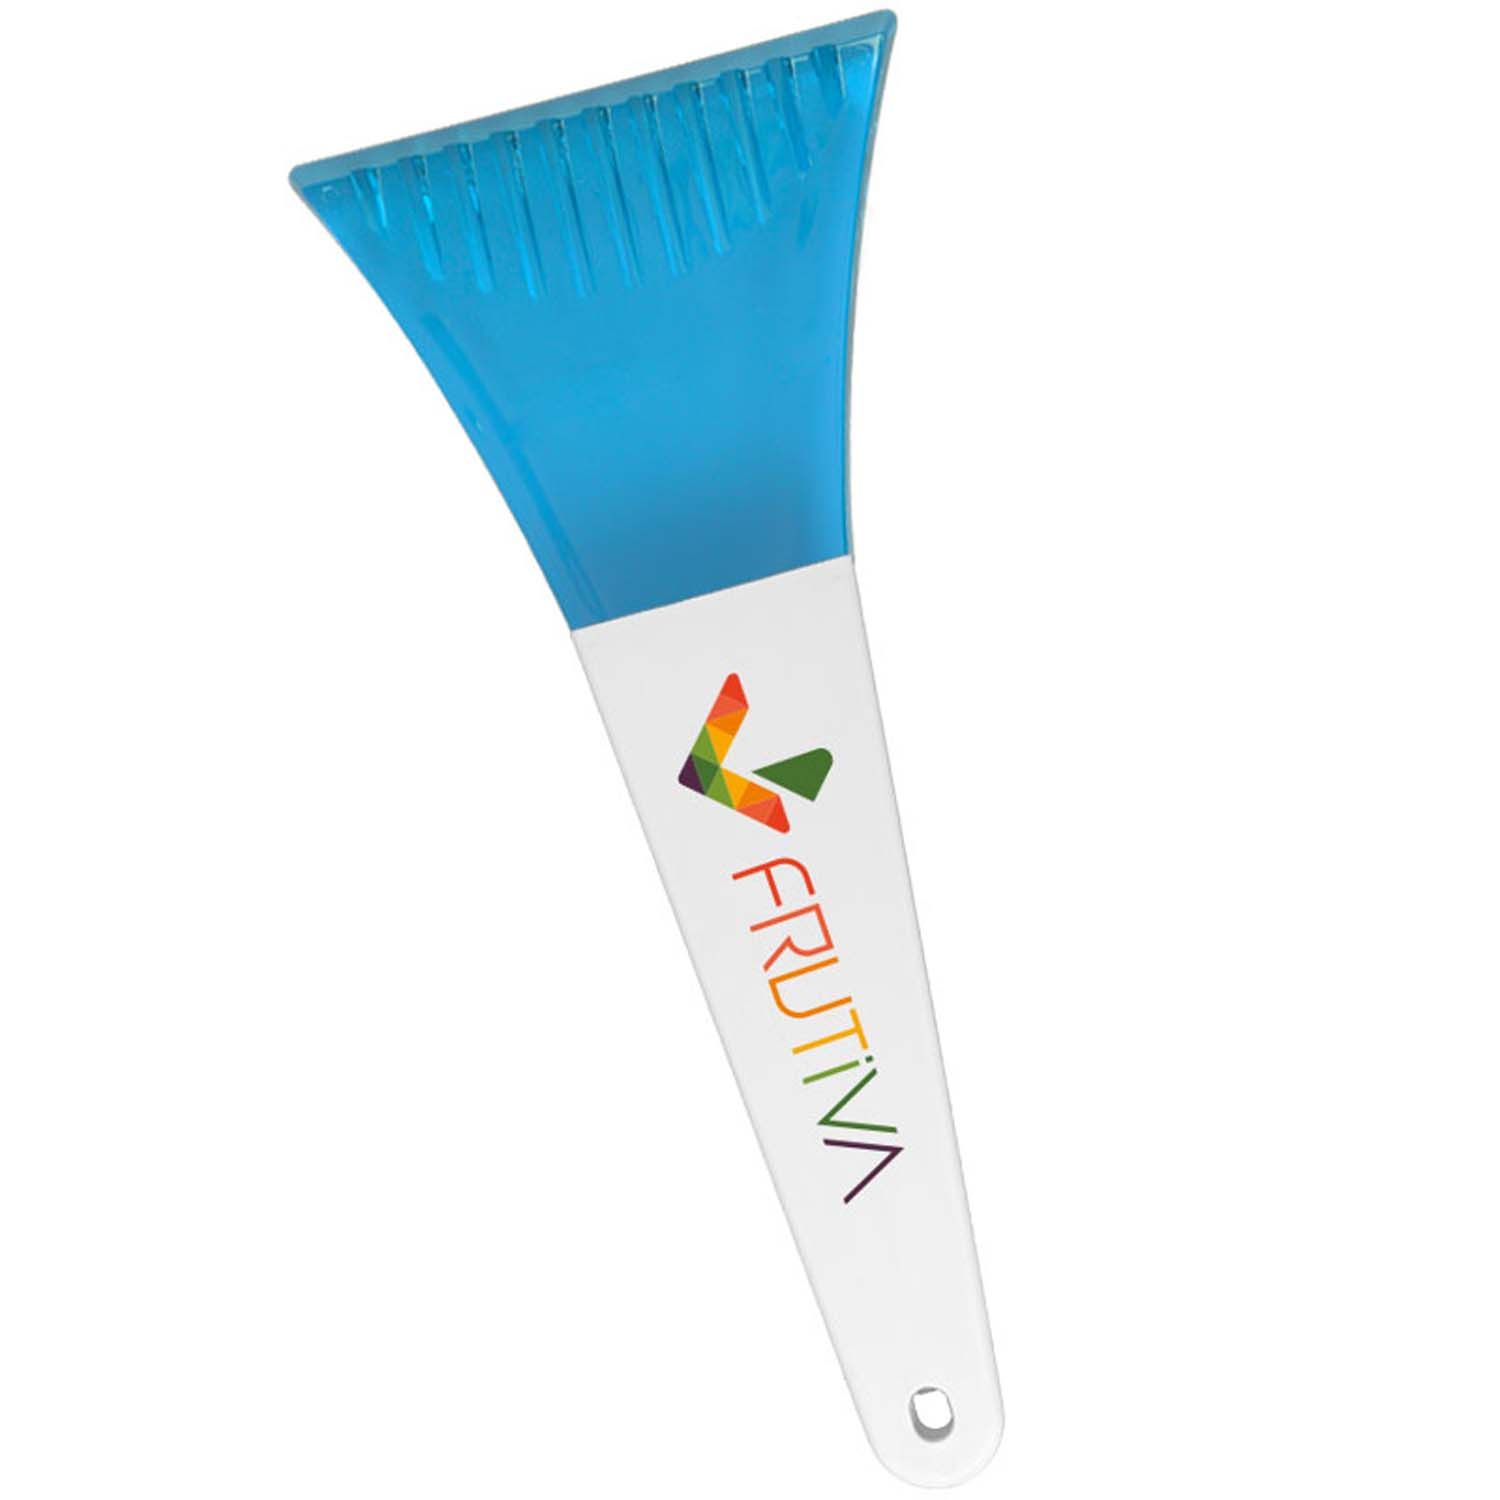 Promotional Ice Scraper | Recycled | USA Made | 11.5" full color